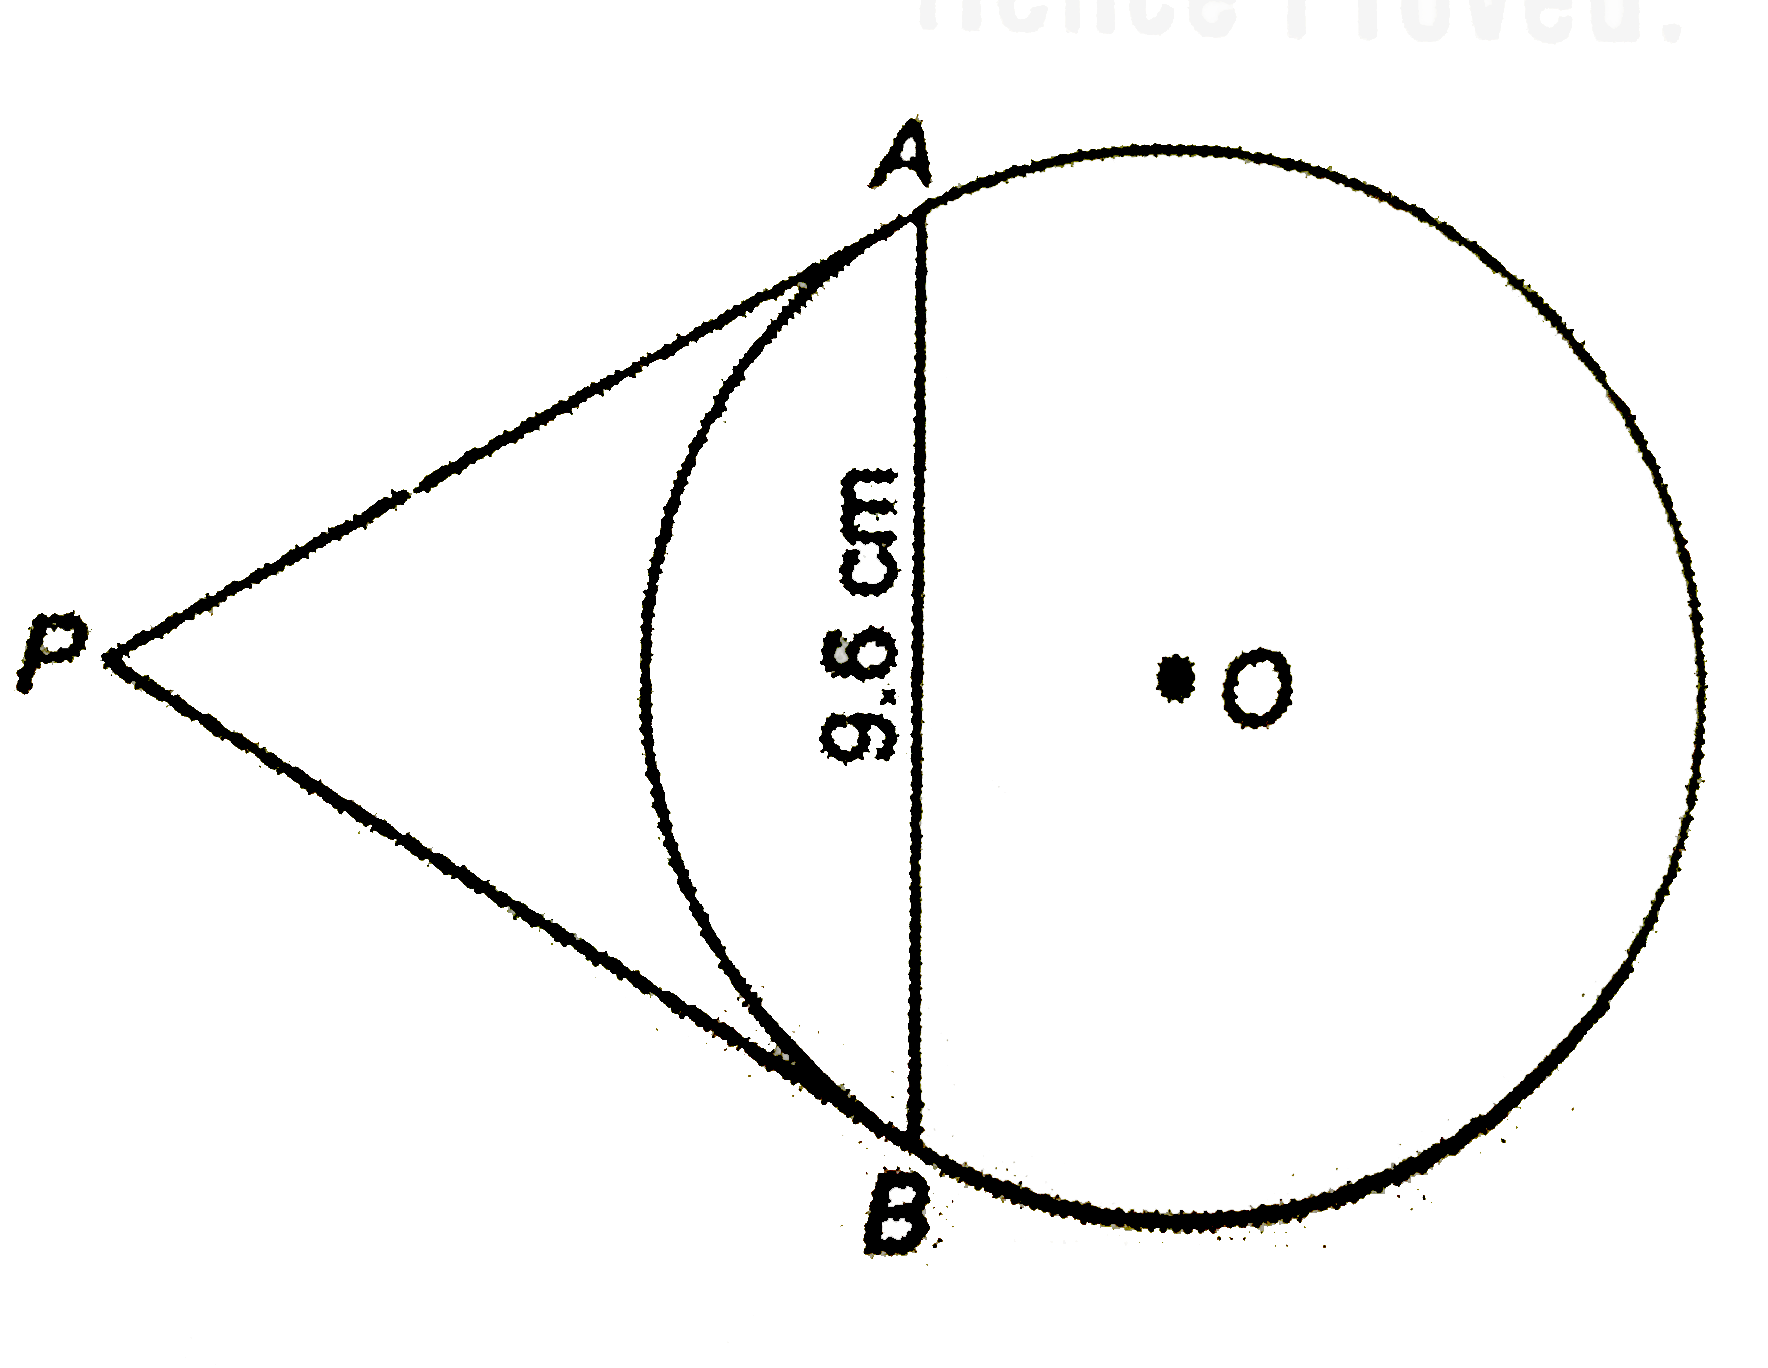 In the adjoining figure, AB is a chord of length 9.6 cm of a circle with centre O and radius 6 cm. The tangents at A and B intersect at P. Find the length of PA.